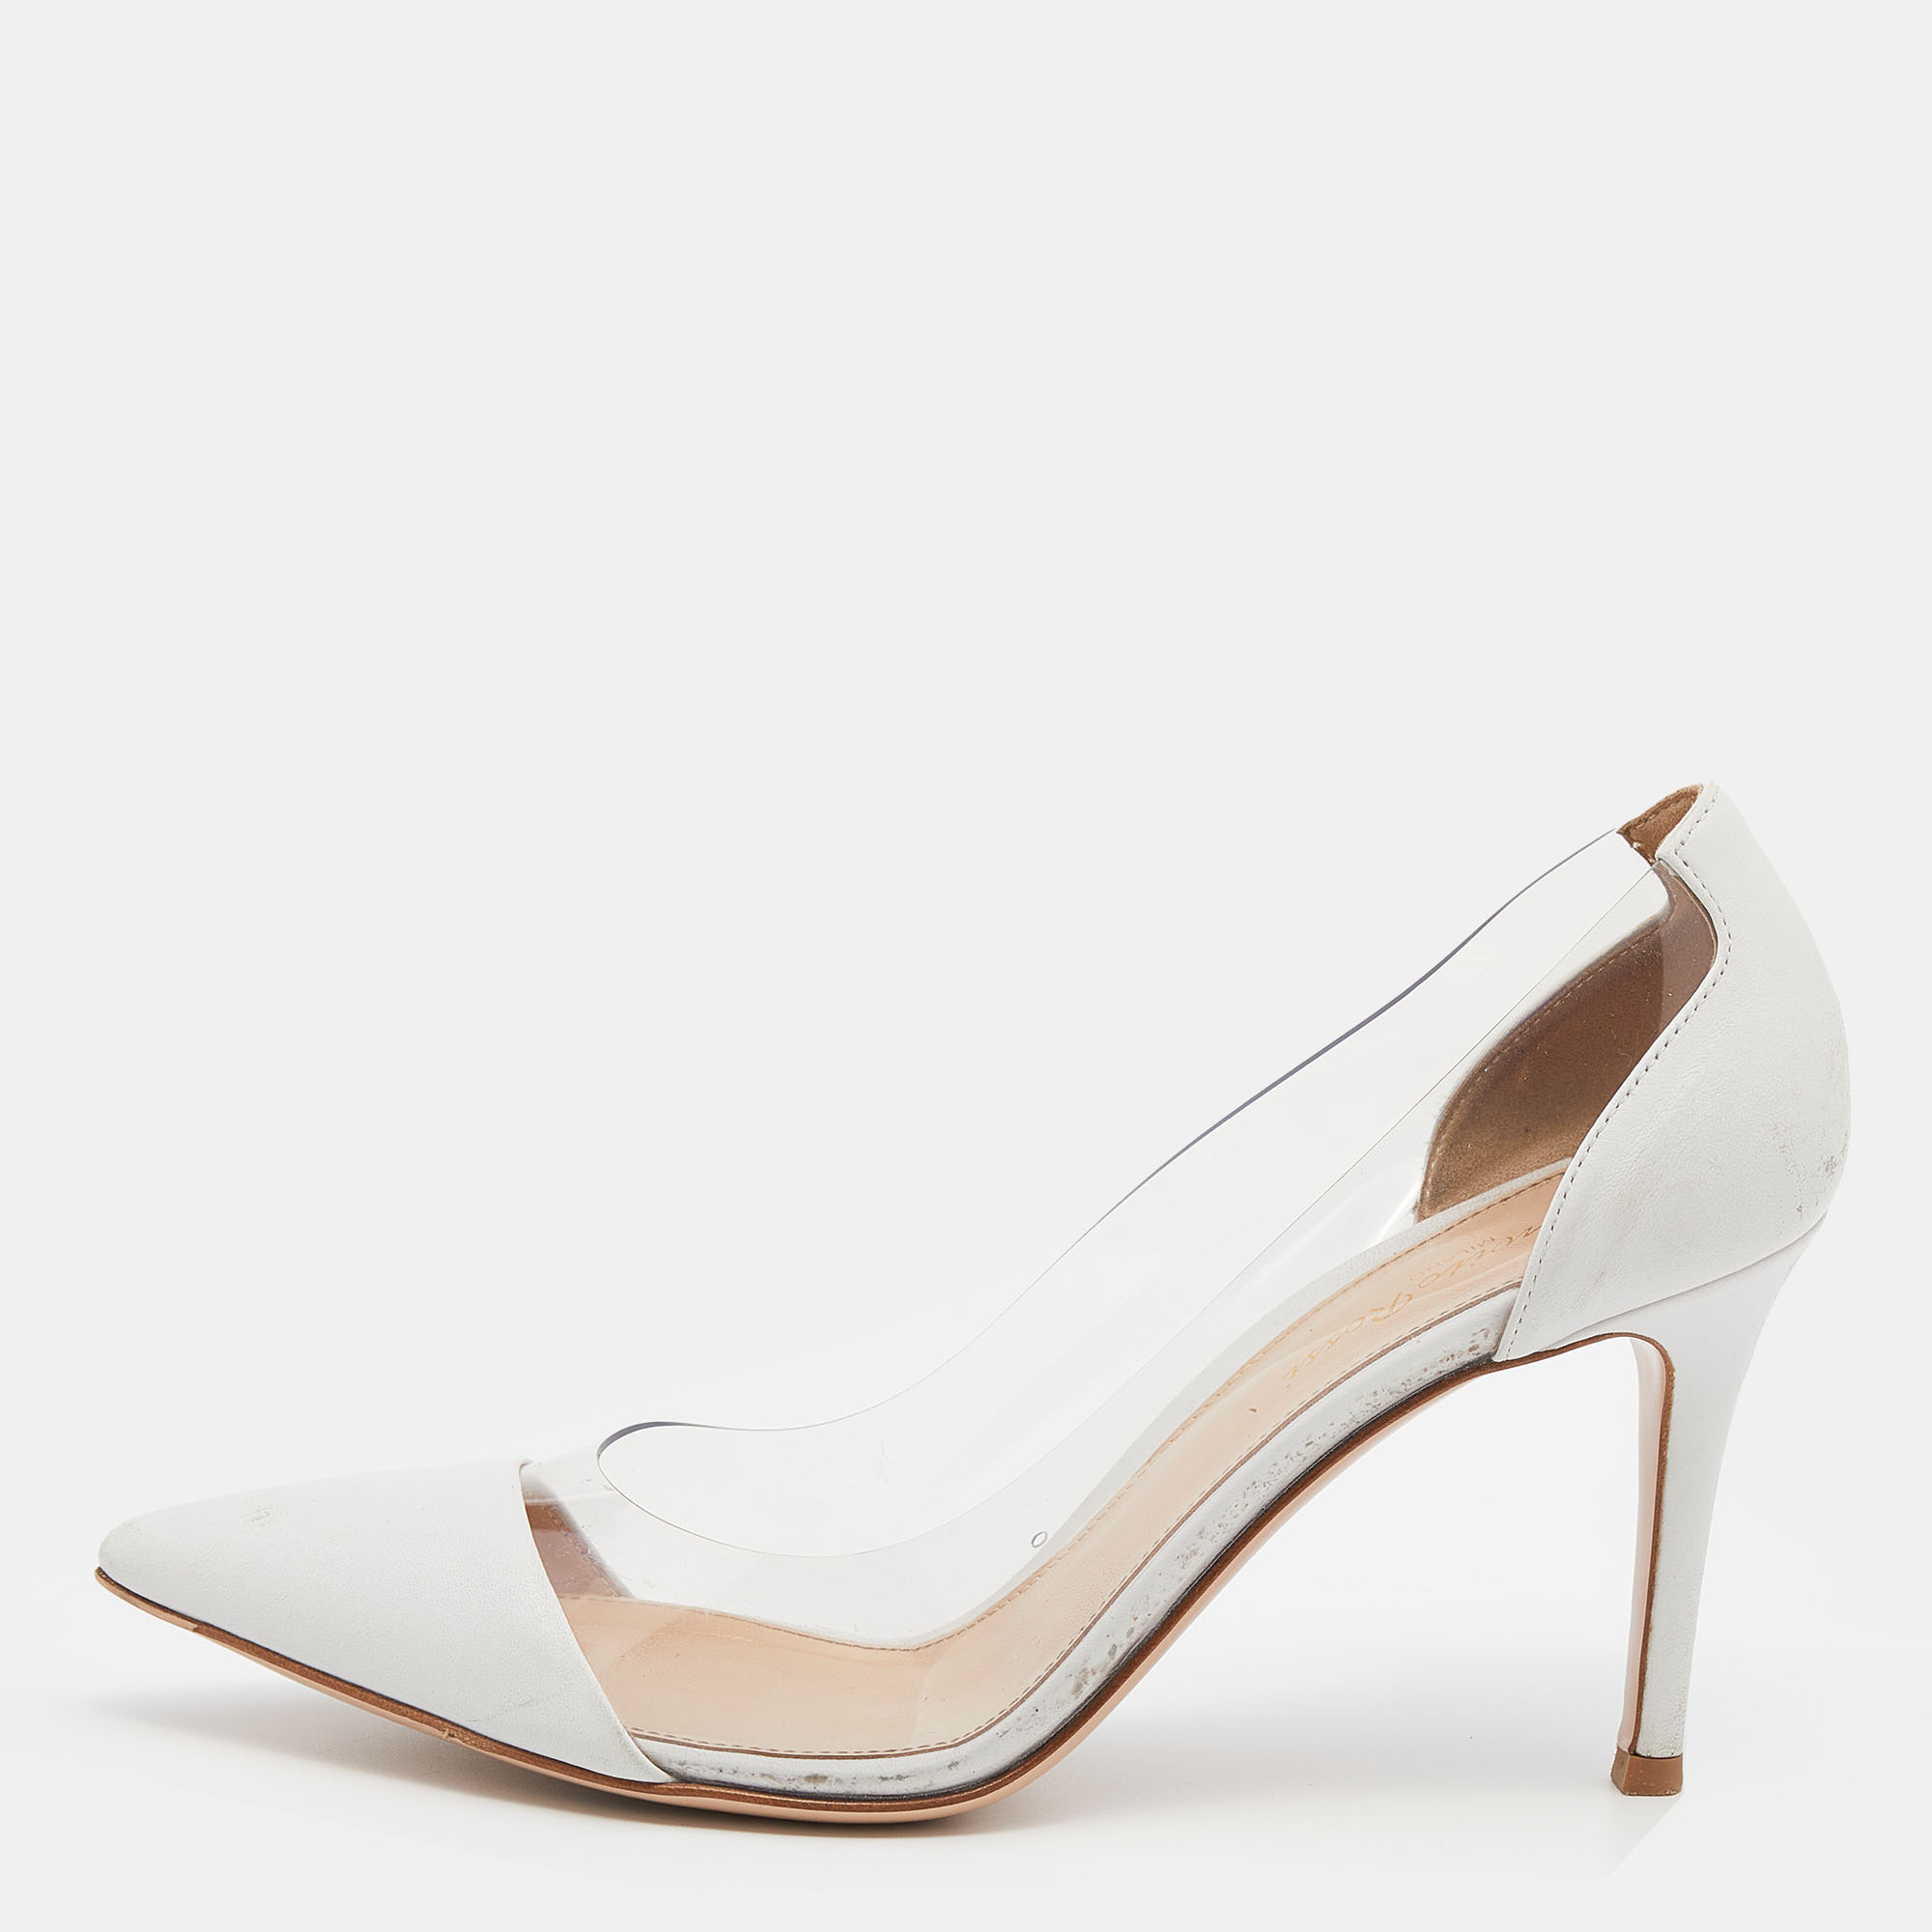 gianvito rossi white leather and pvc plexi pointed toe pumps size 37